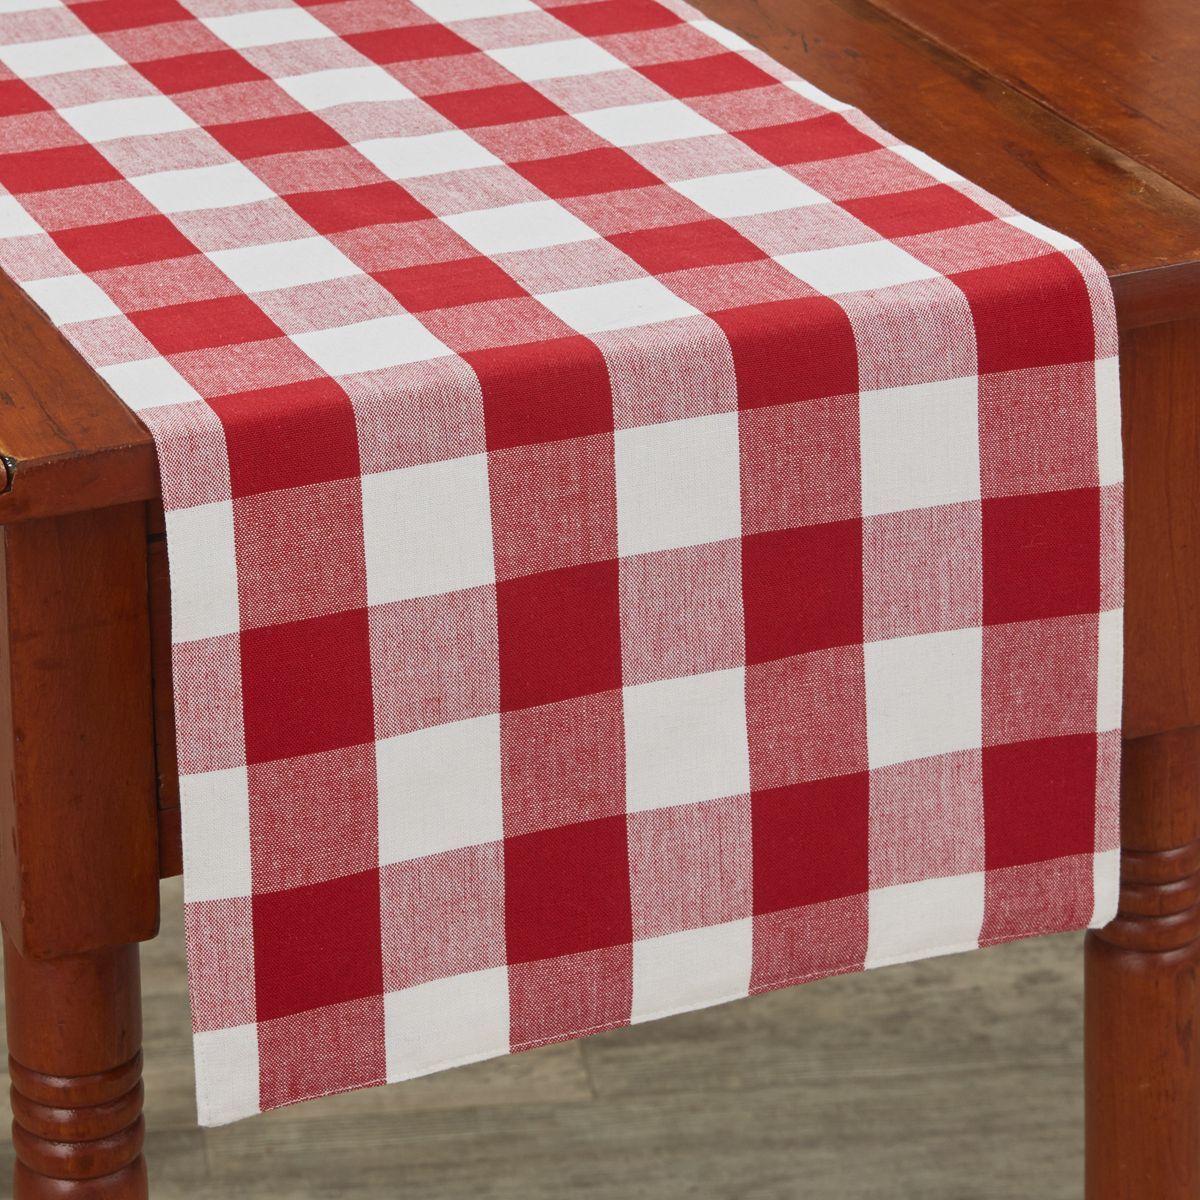 Park Designs Buffalo Check Backed Table Runner  - Red & Cream | Target